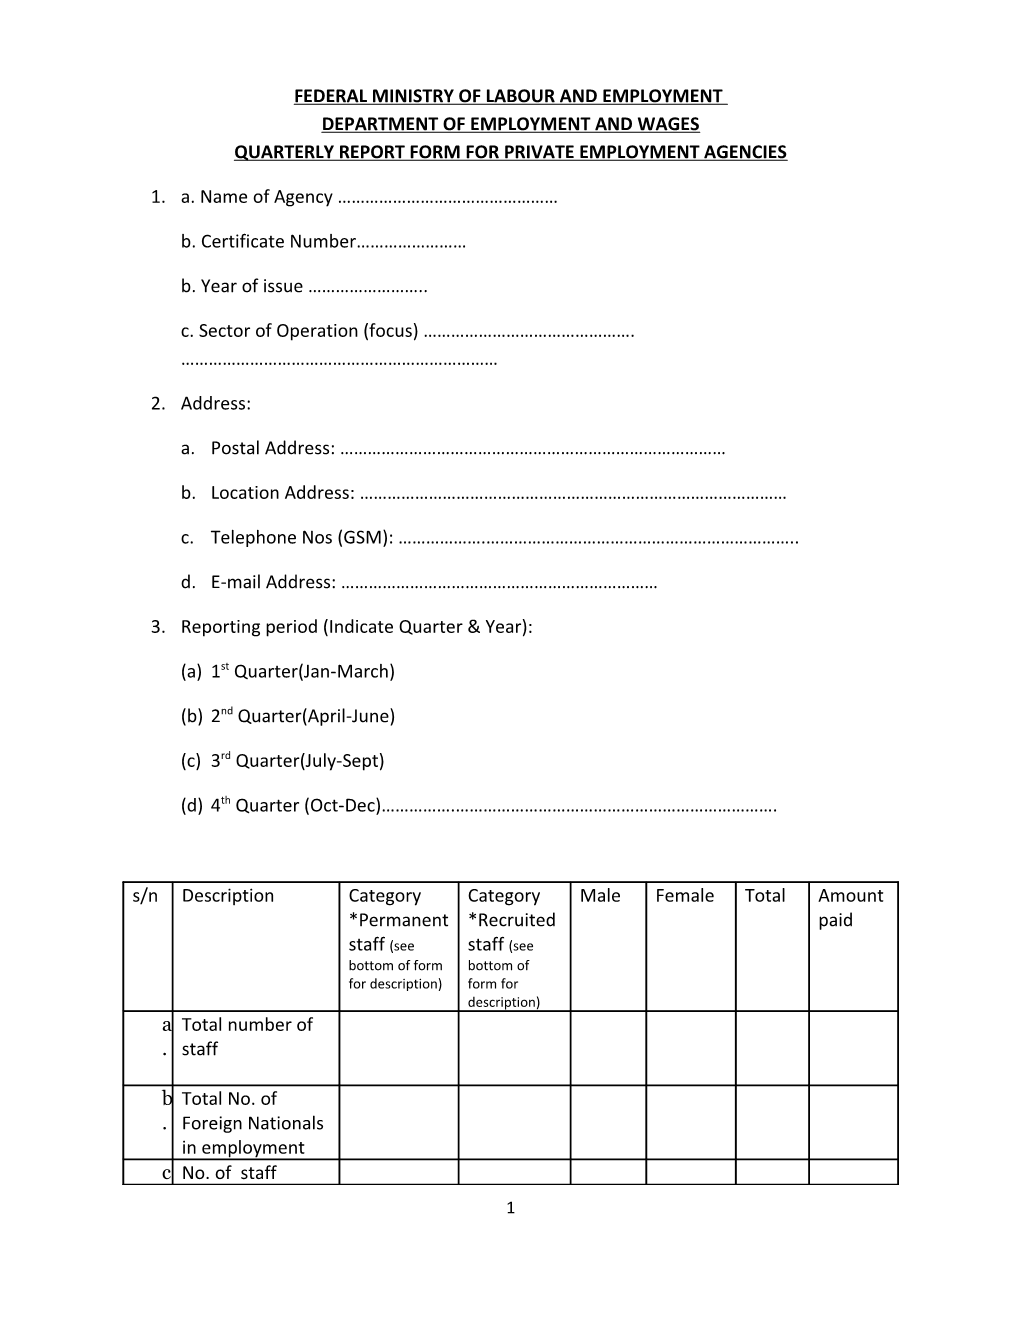 Quarterly Report Form for Private Employment Agencies